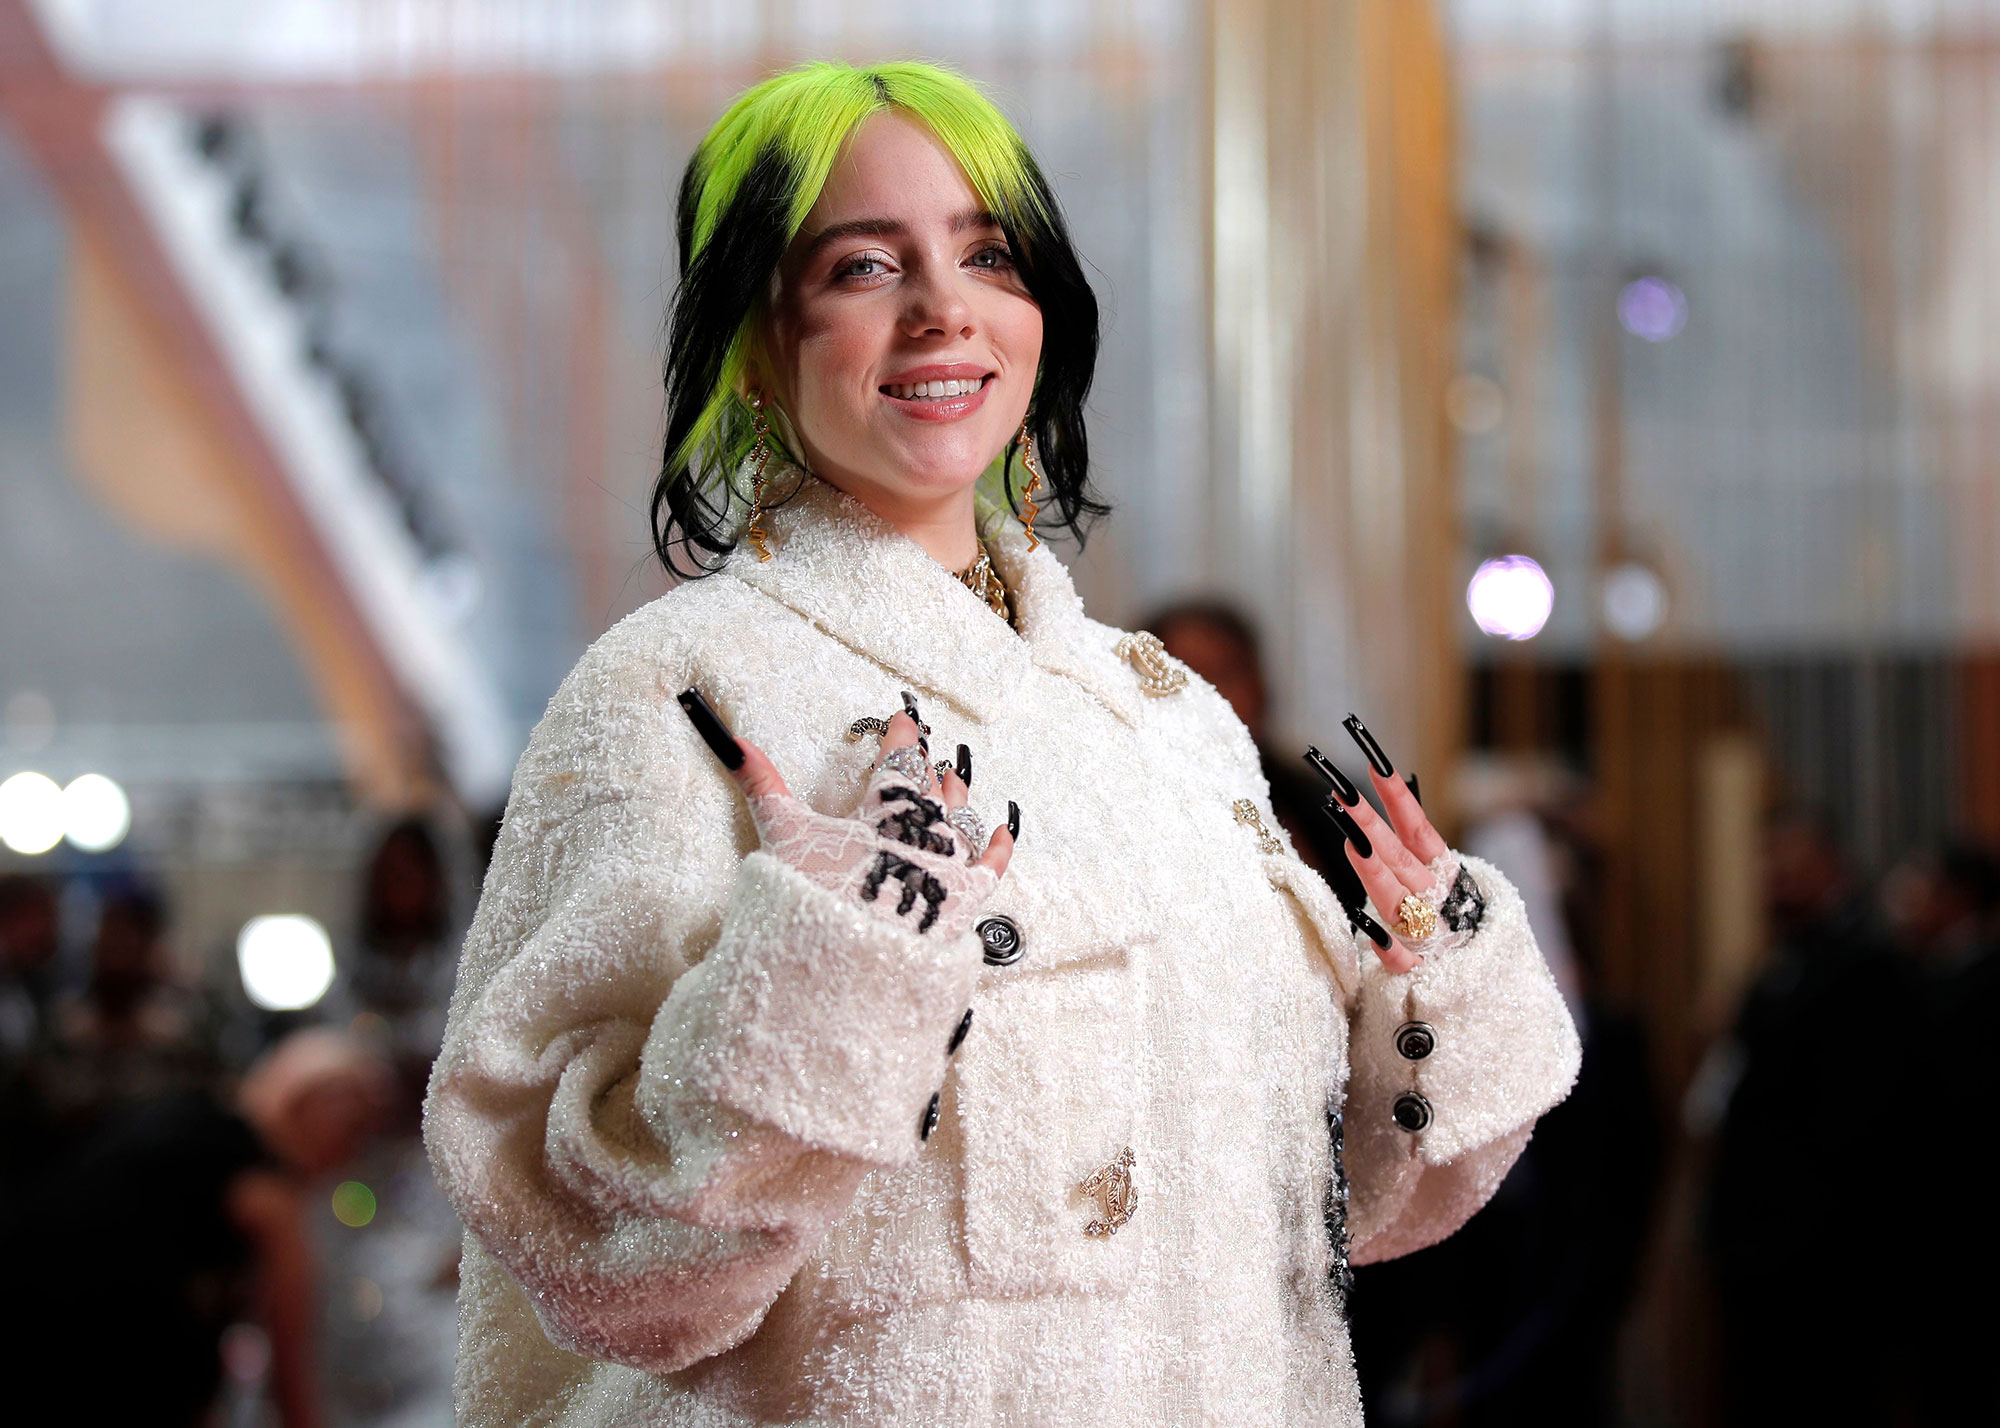 Billie Eilish Has Hypermobility — Here's What That Is